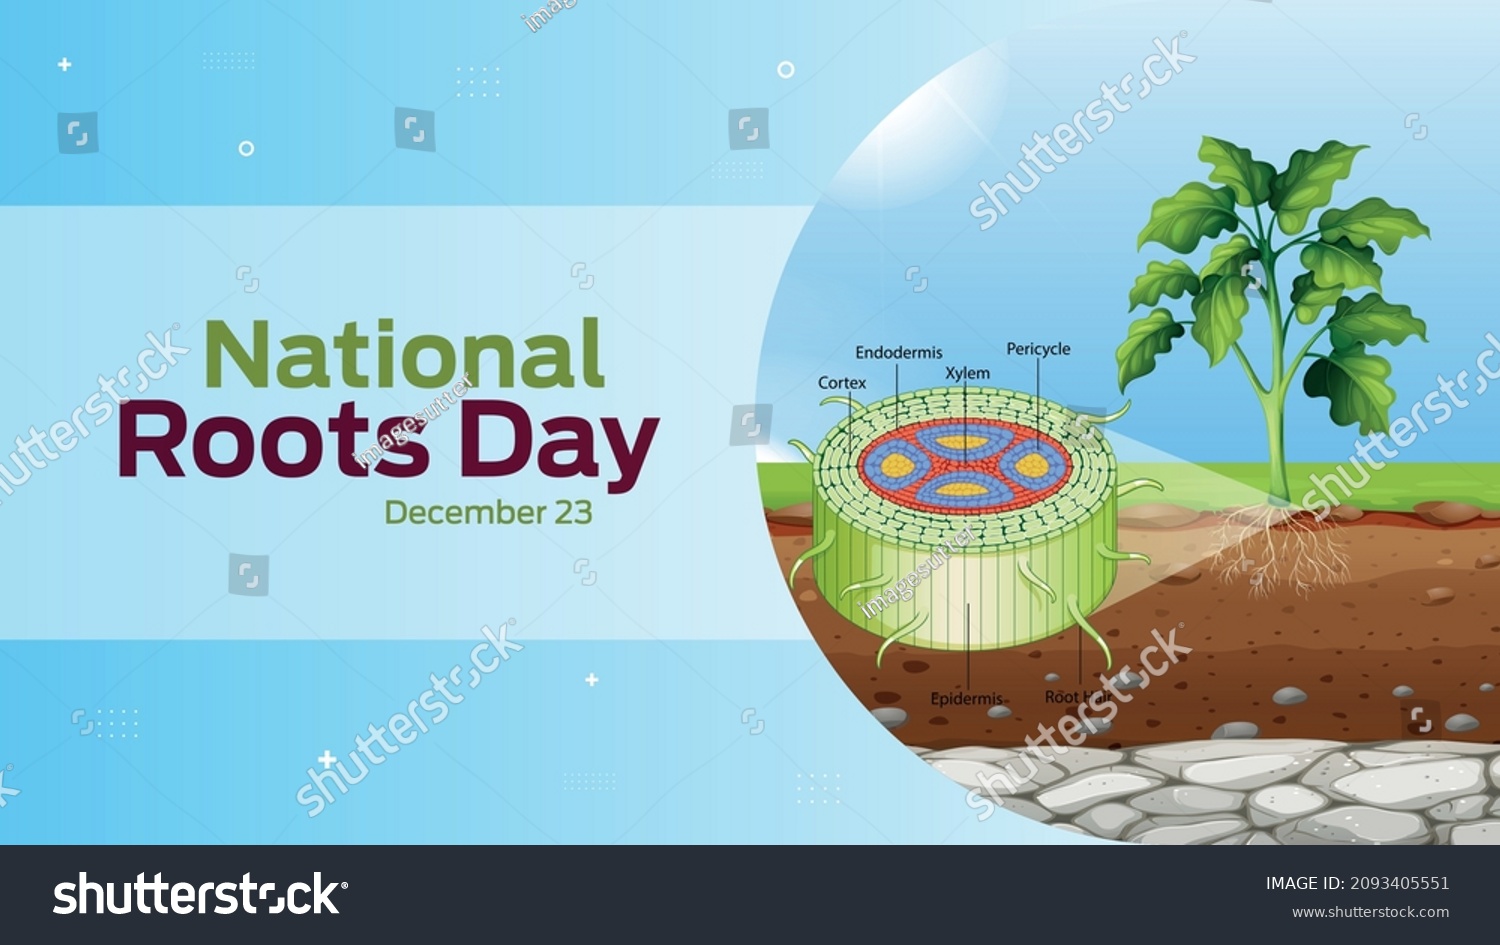 National Roots Day On December 23 Stock Vector Royalty Free 2093405551 Shutterstock 9734